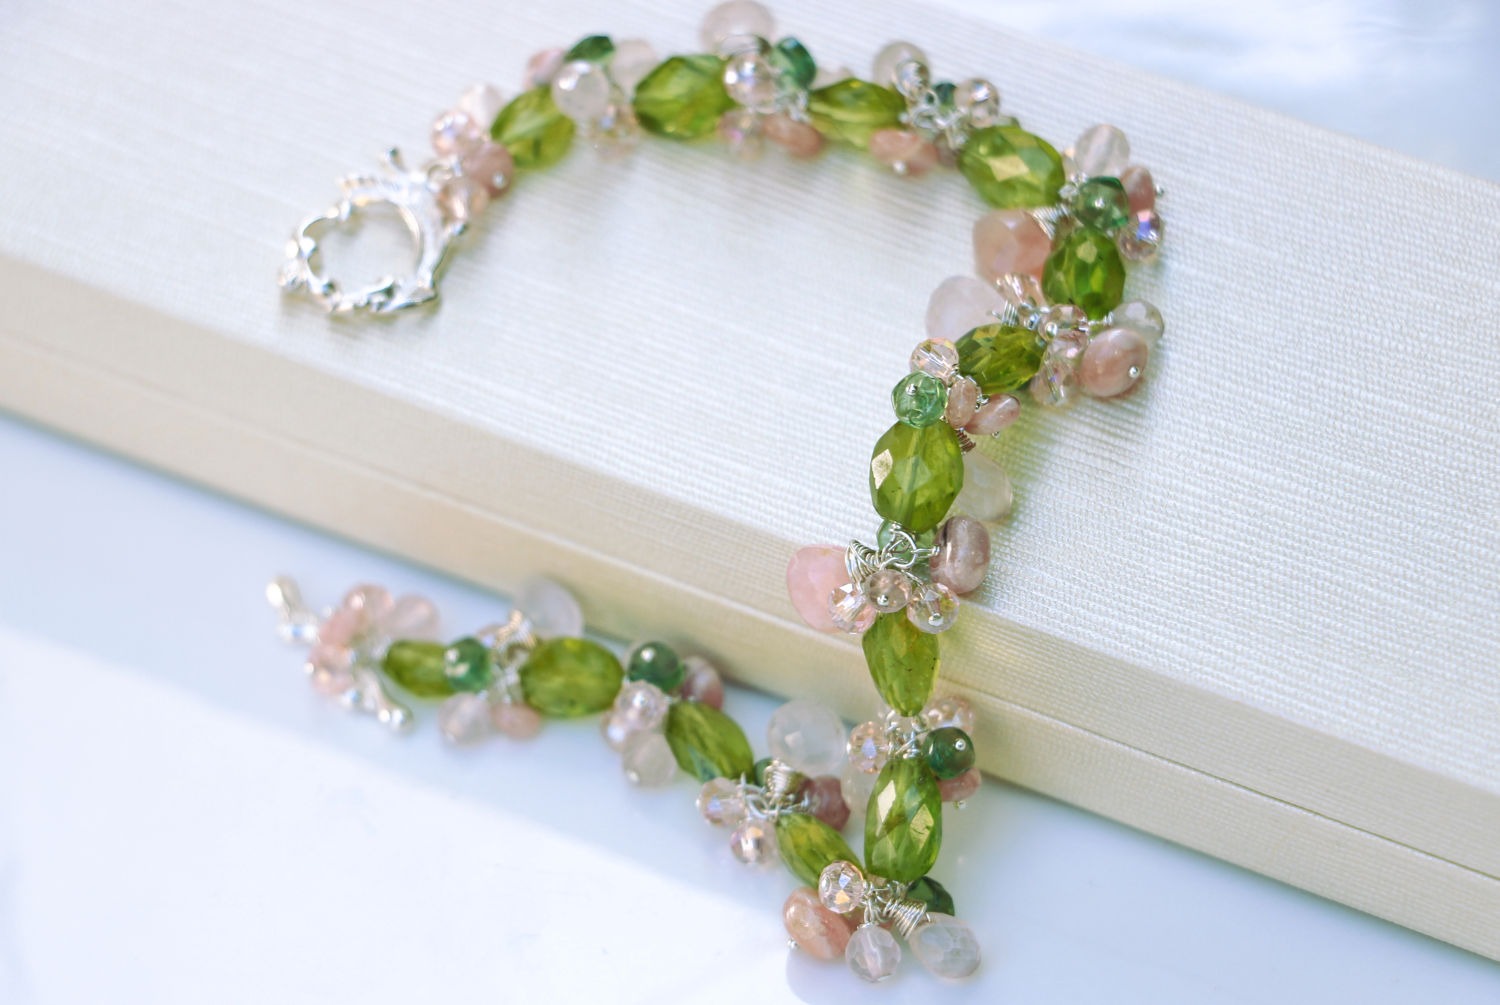 Green Peridot with Rose Quartz and Pink Opal Gemstone Cluster Bracelet in Silver